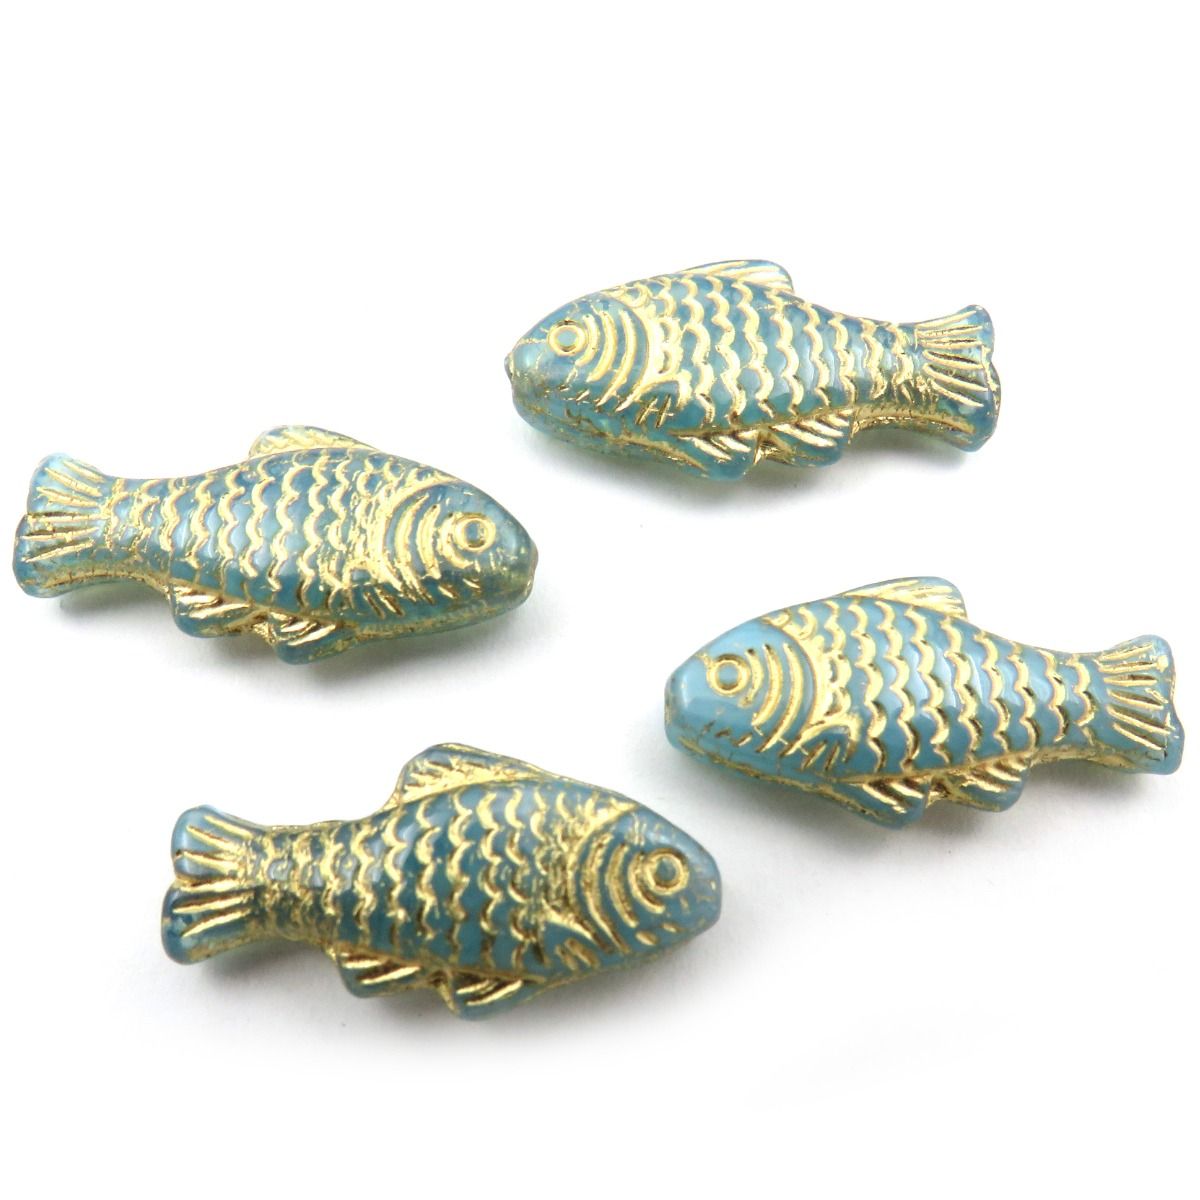 Glass Charms - Fish - Blue and Gold - Set of 4